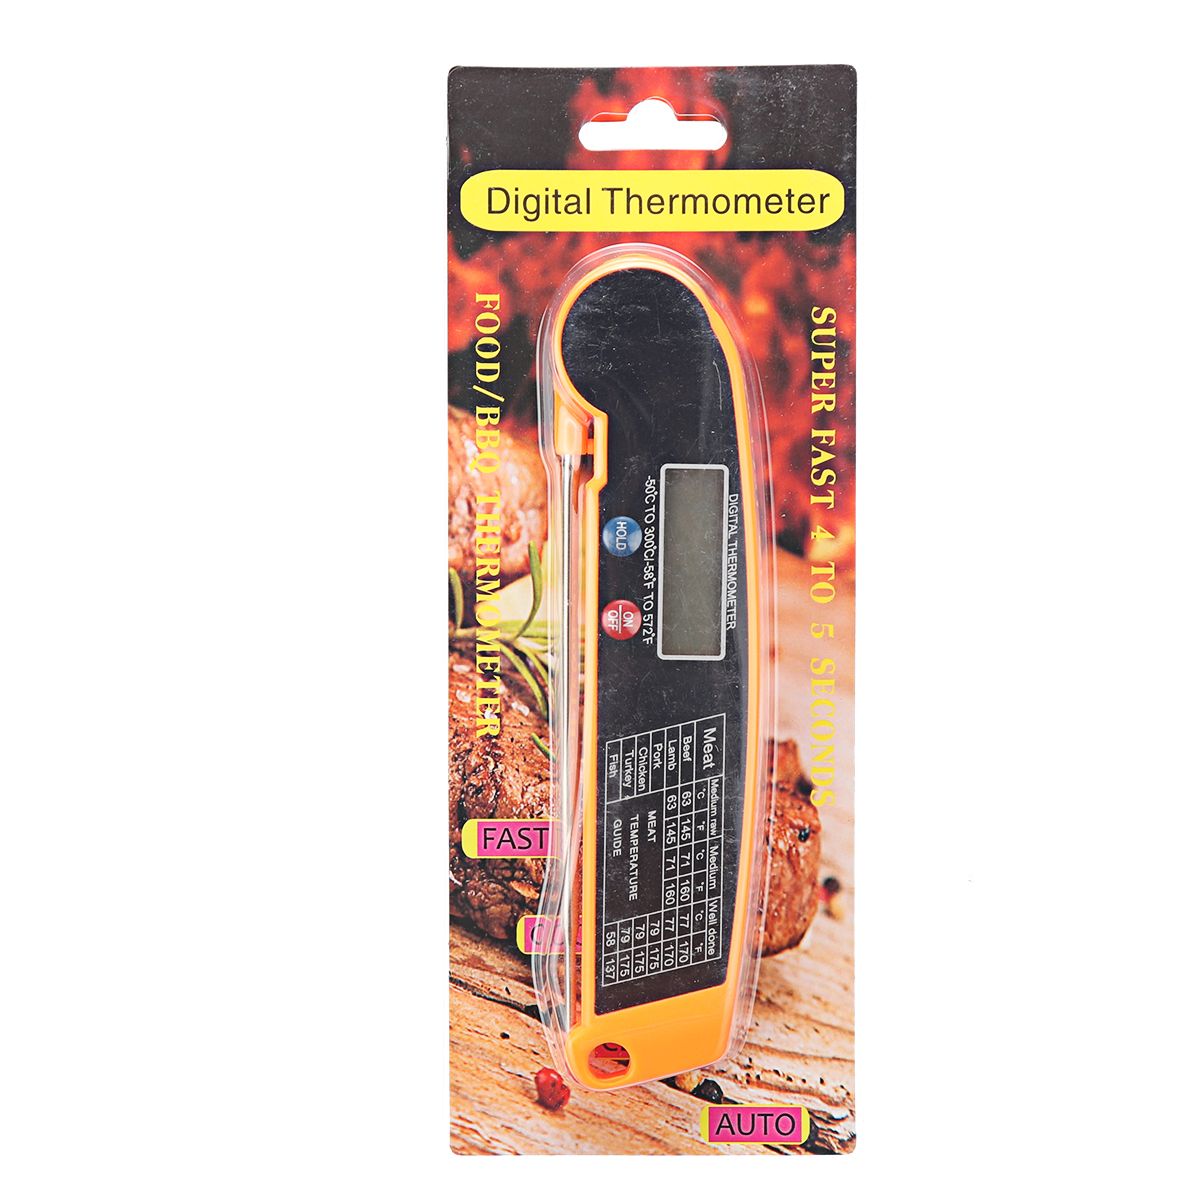 Digital-Thermometer-Meat-Cooking-Probe-BBQ-Electronic-Oven-Folding-Kitchen-Thermometer-1718149